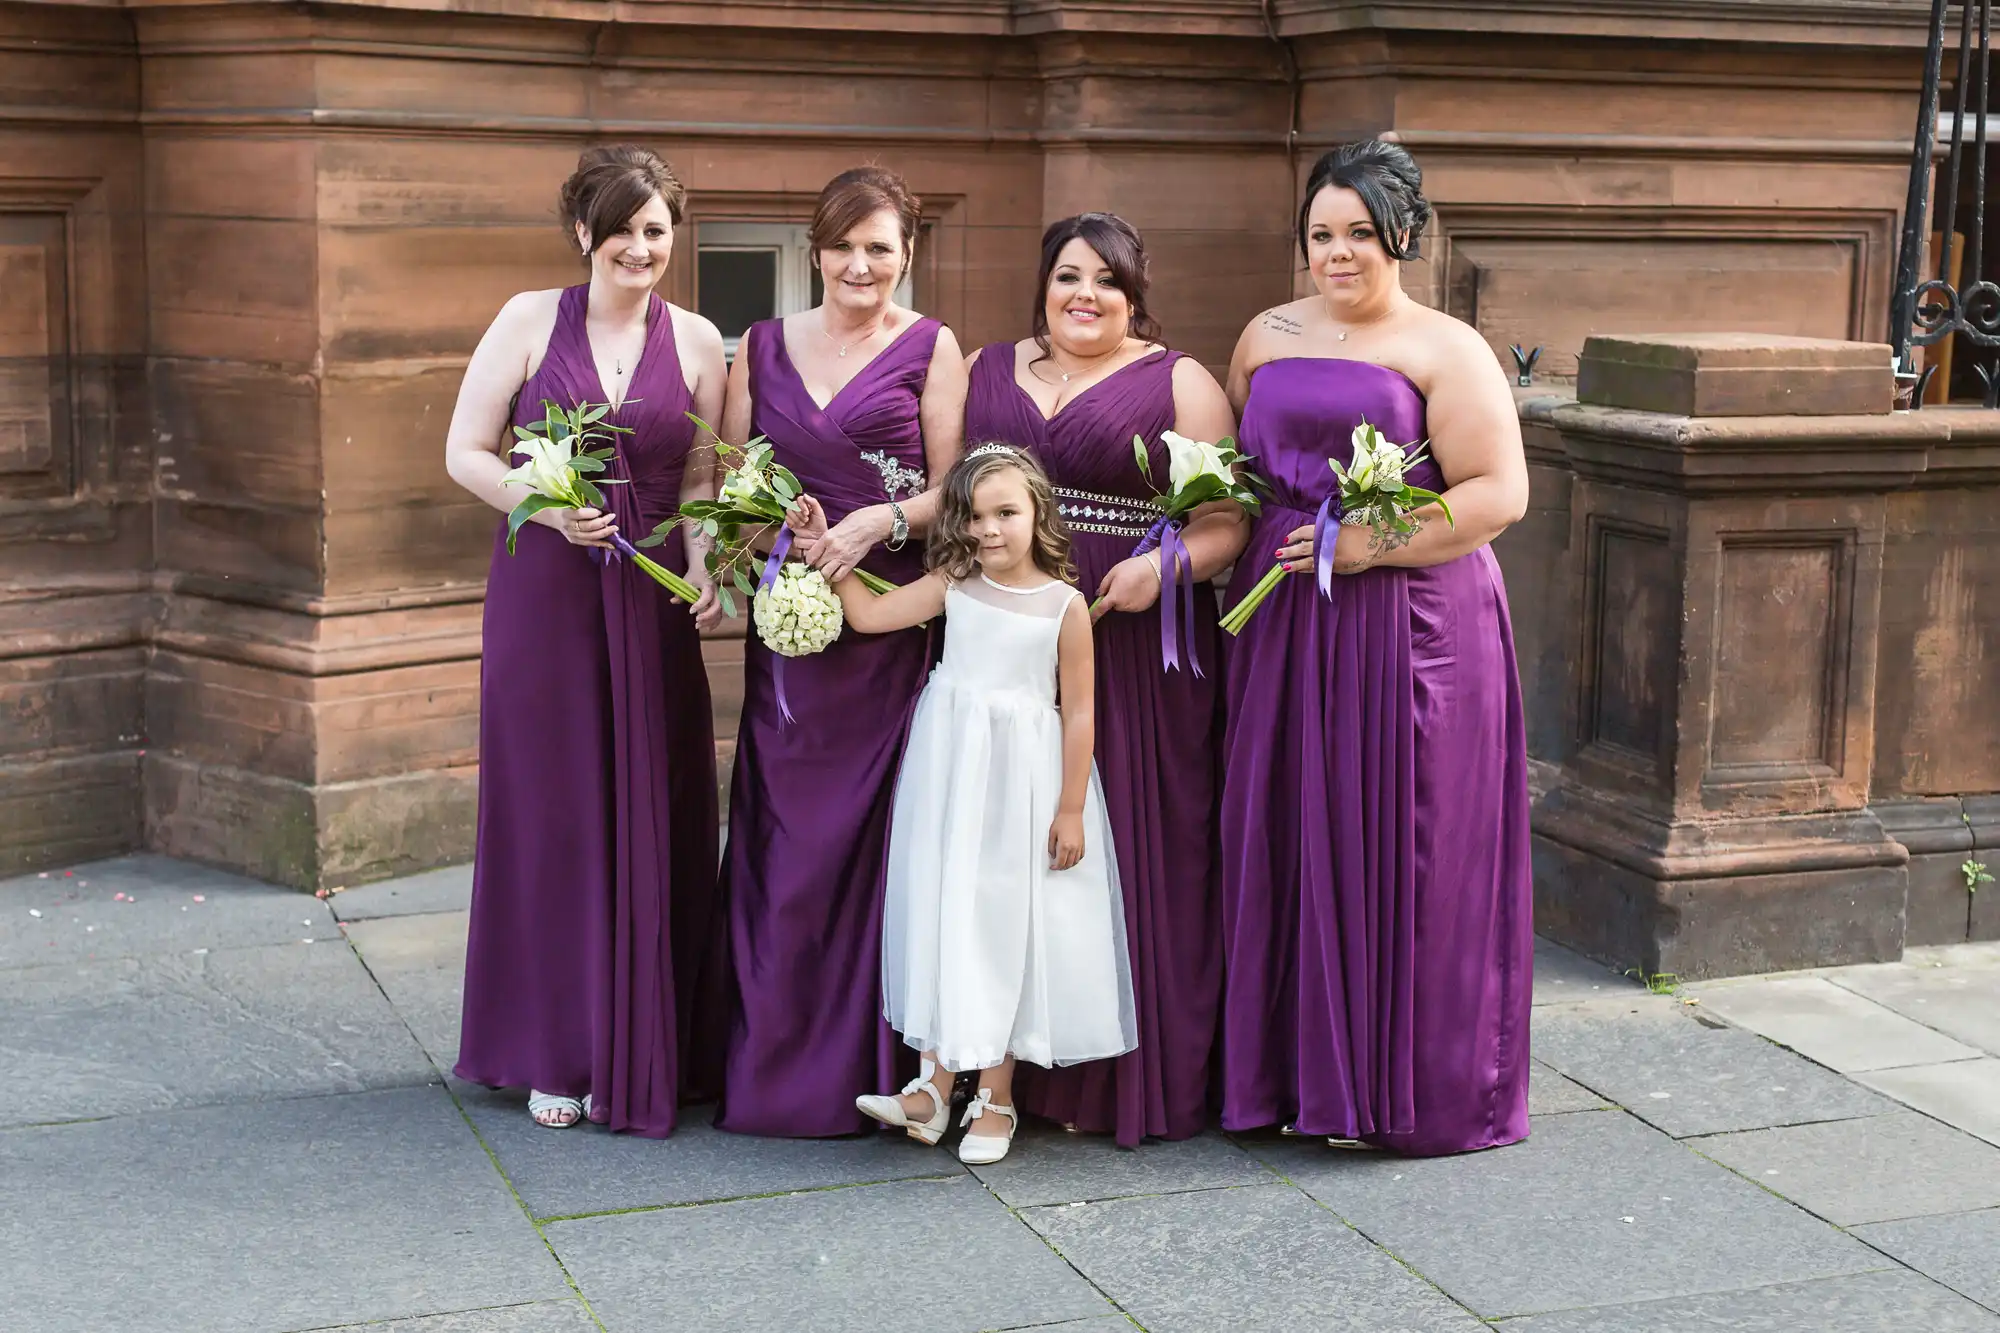 Four women in purple dresses holding bouquets and a young girl in a white dress smiling, standing together outside a brick building.